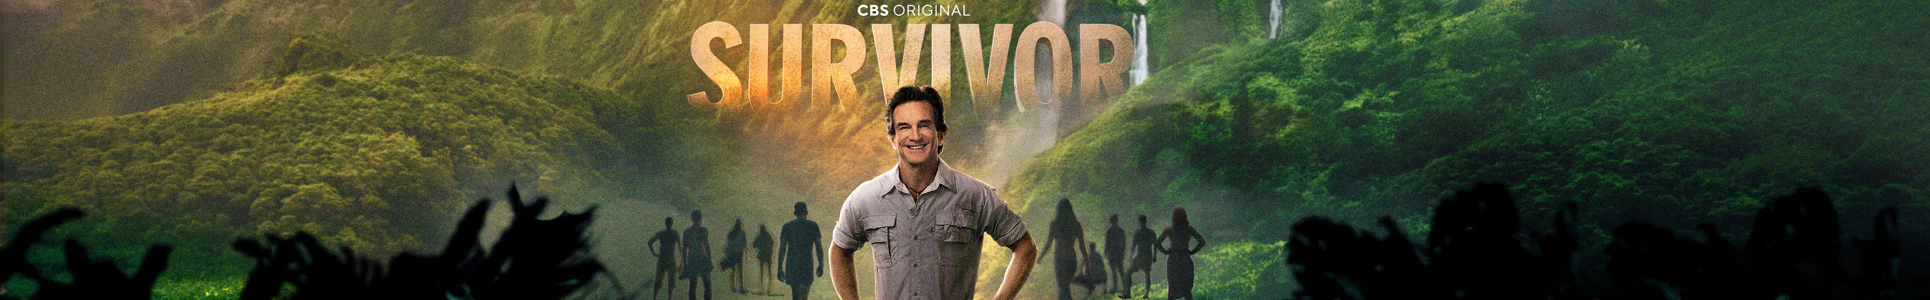 This is the Logo for the 40th season of the TV series Survivor. Post Sound performed by Mixers Sound.